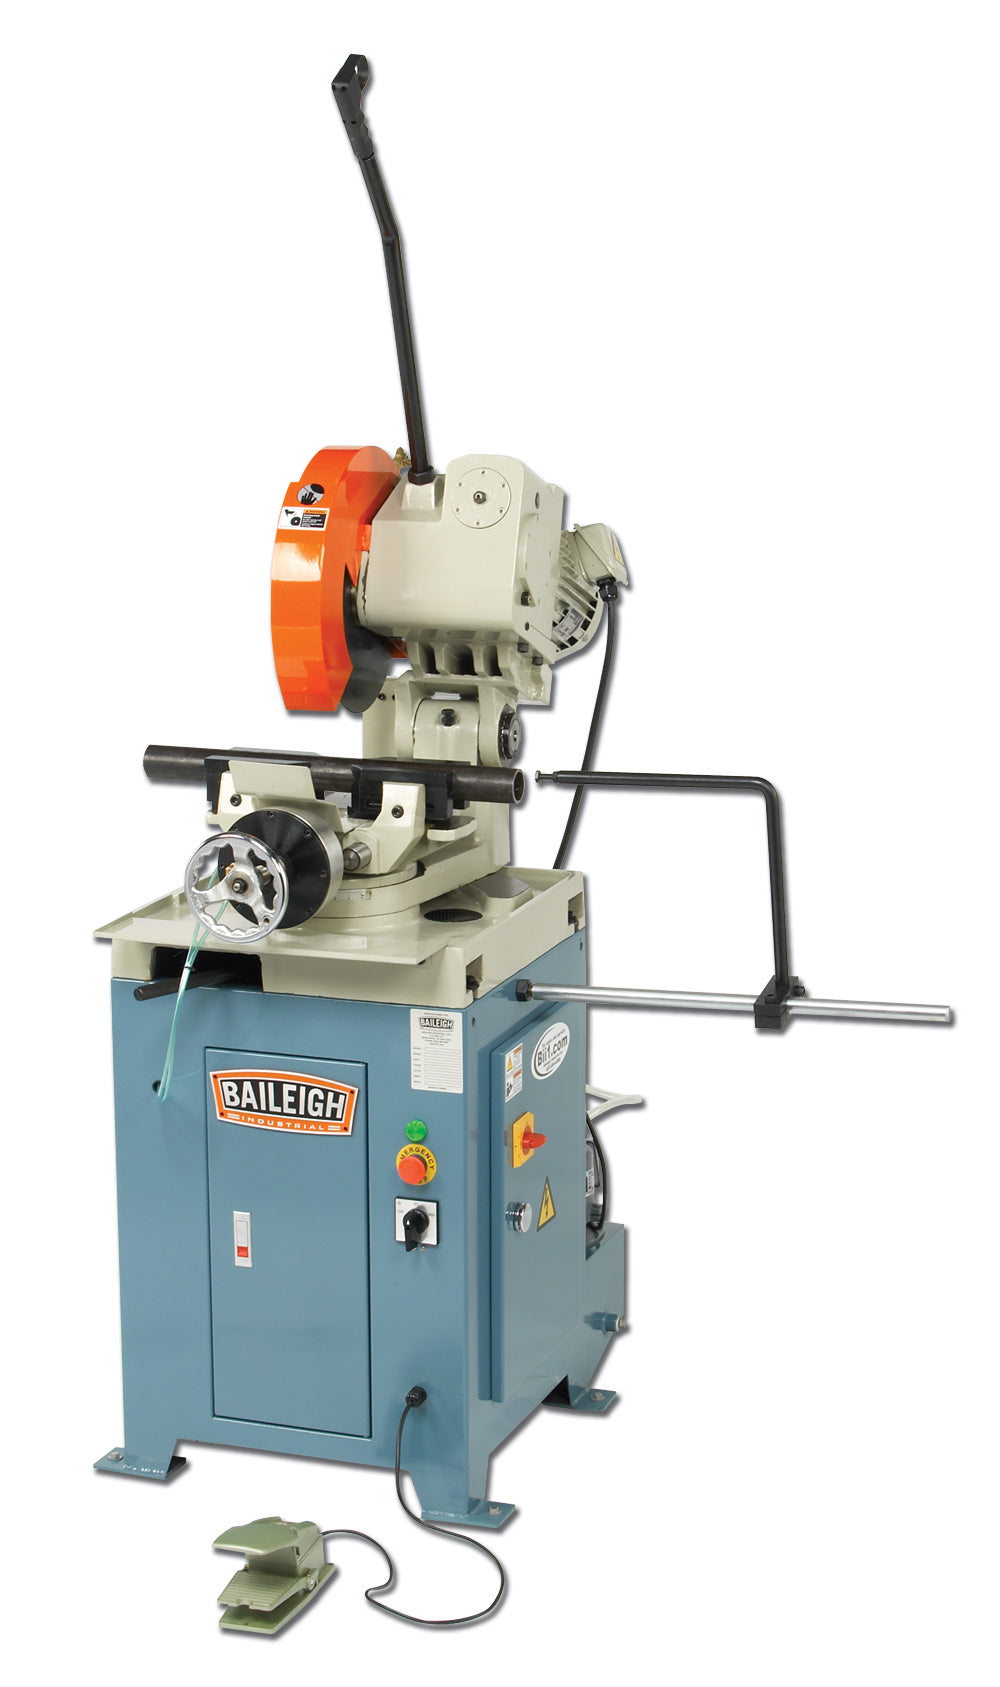 Baileigh CS-350P 220V 3 Phase Heavy Duty Manually Operated Cold Saw with Pneumatic Vise 14" Blade Diameter